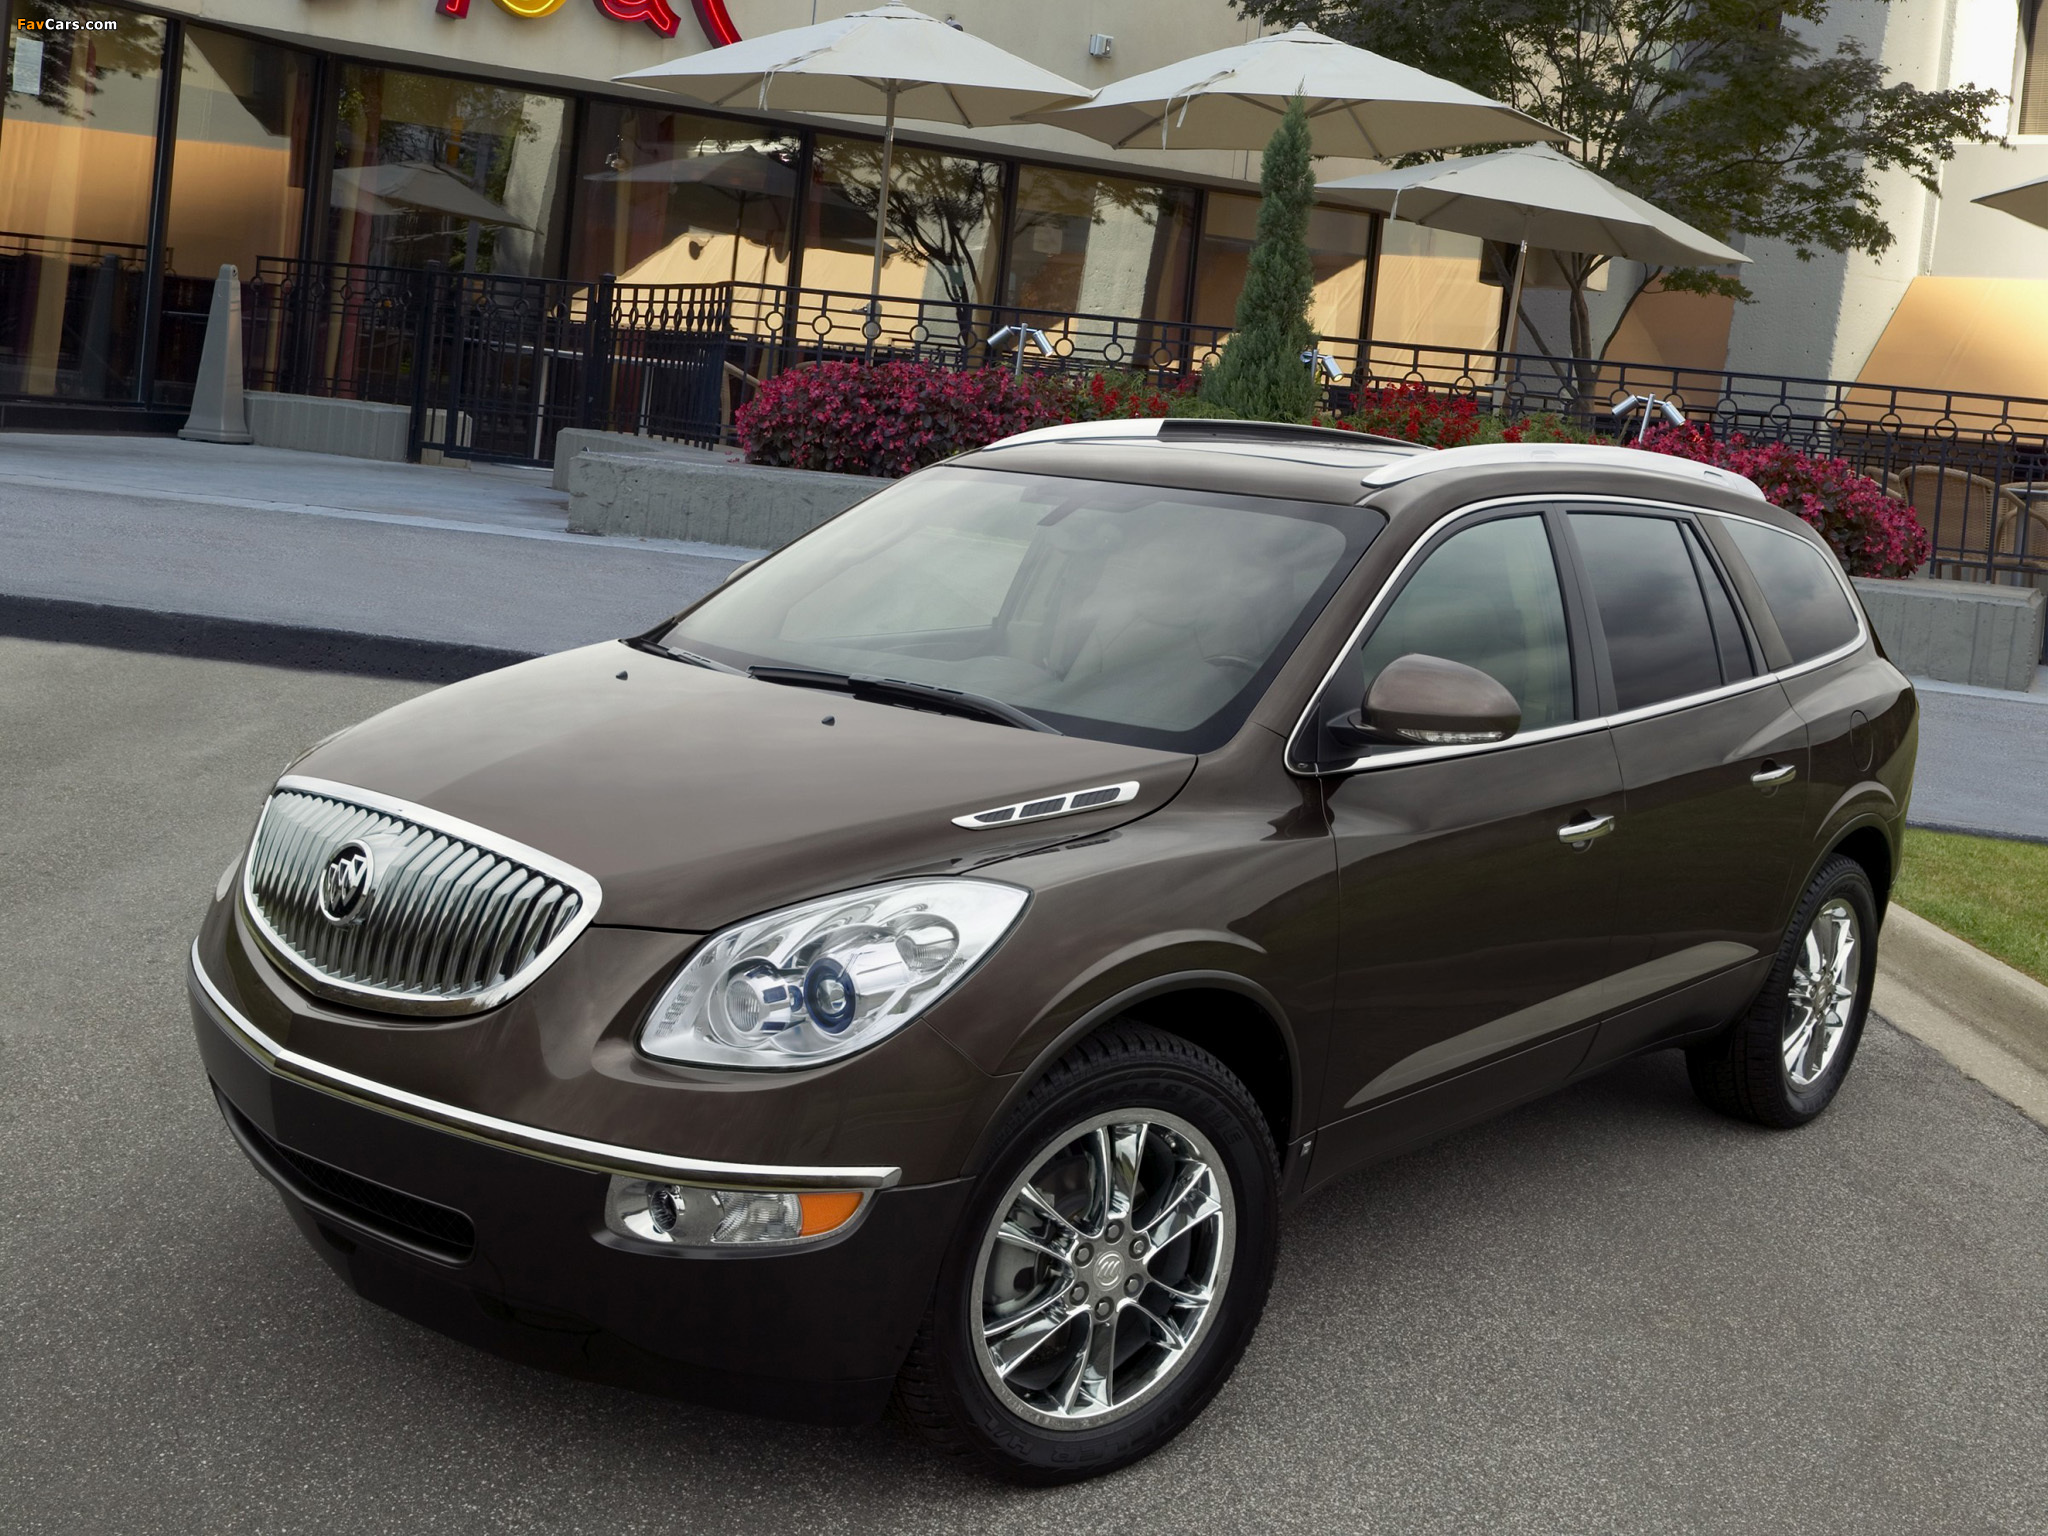 Buick Enclave 2007 pictures (2048 x 1536)